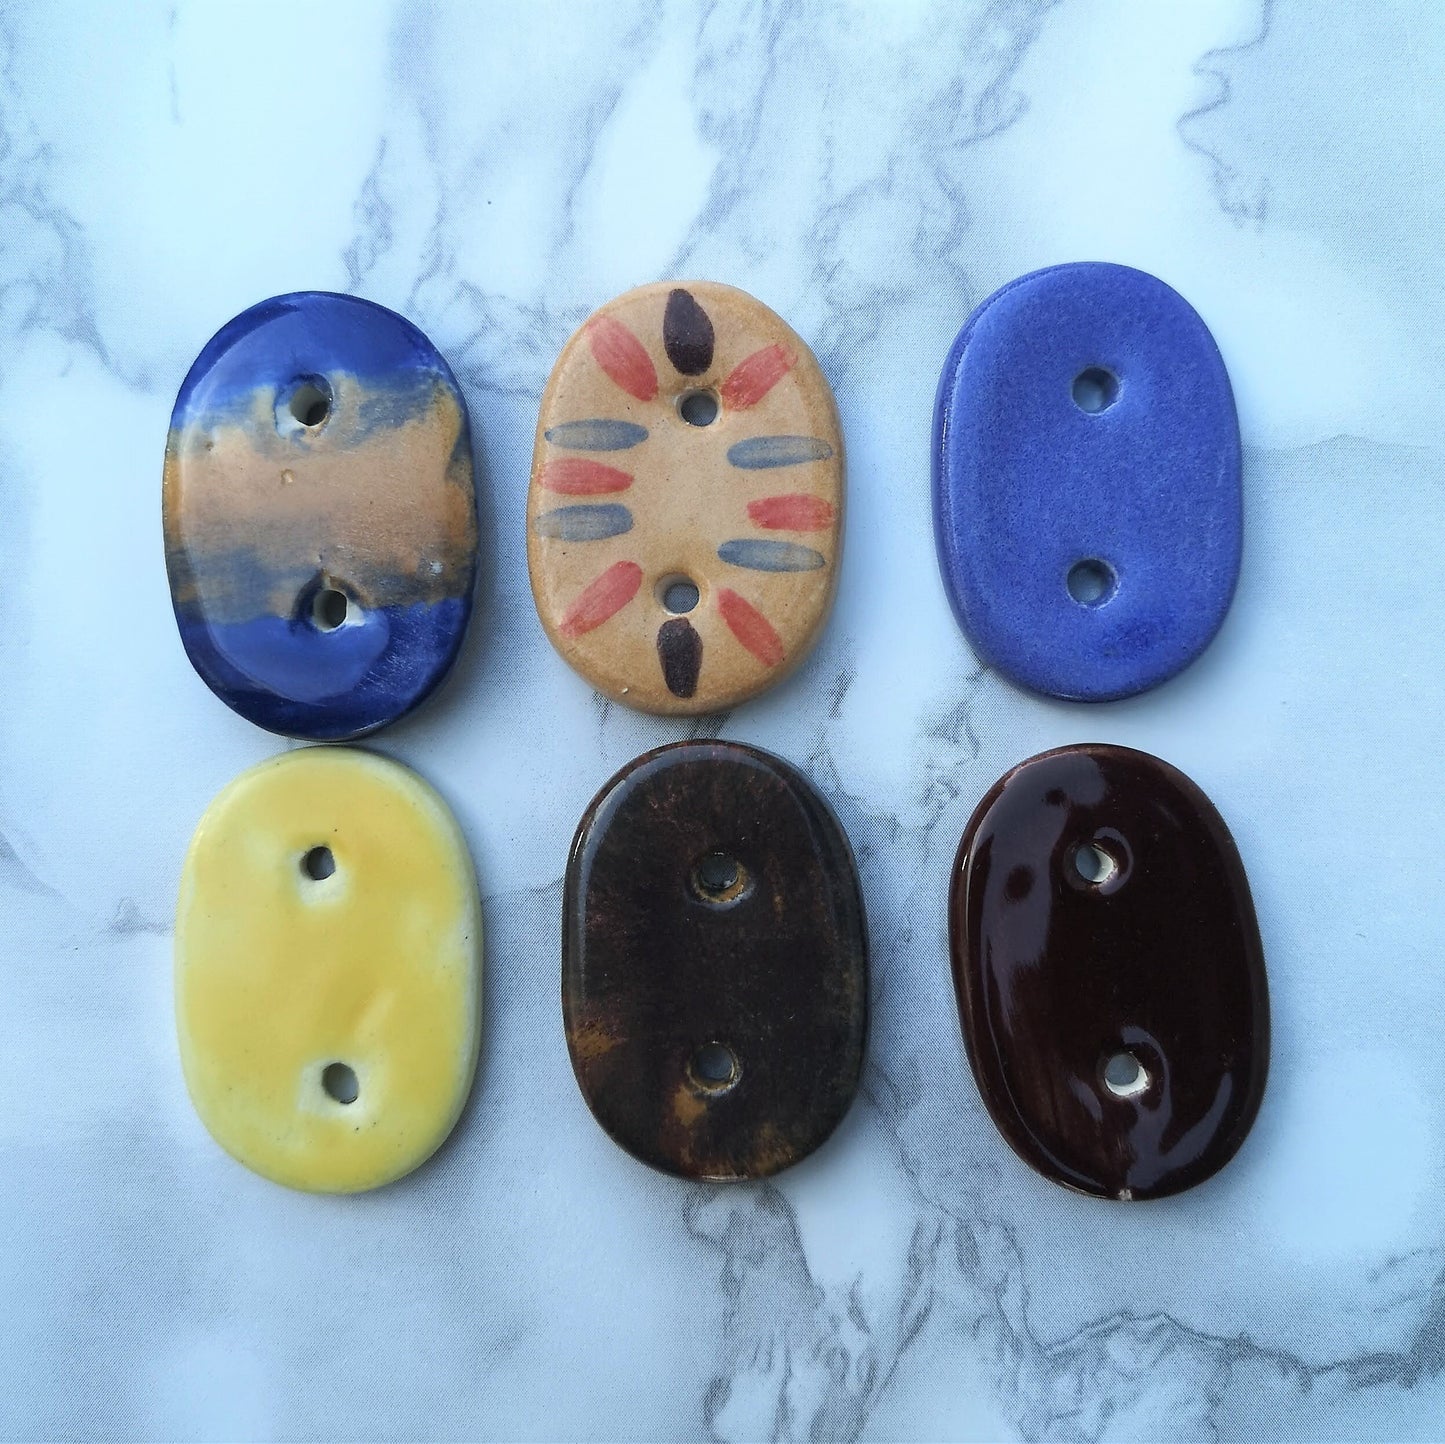 6Pc 35mm Extra Large Handmade Ceramic Sewing Buttons, Colorful Novelty Buttons, Hand Painted Oval Artisan Sewing Supplies And Notions - Ceramica Ana Rafael